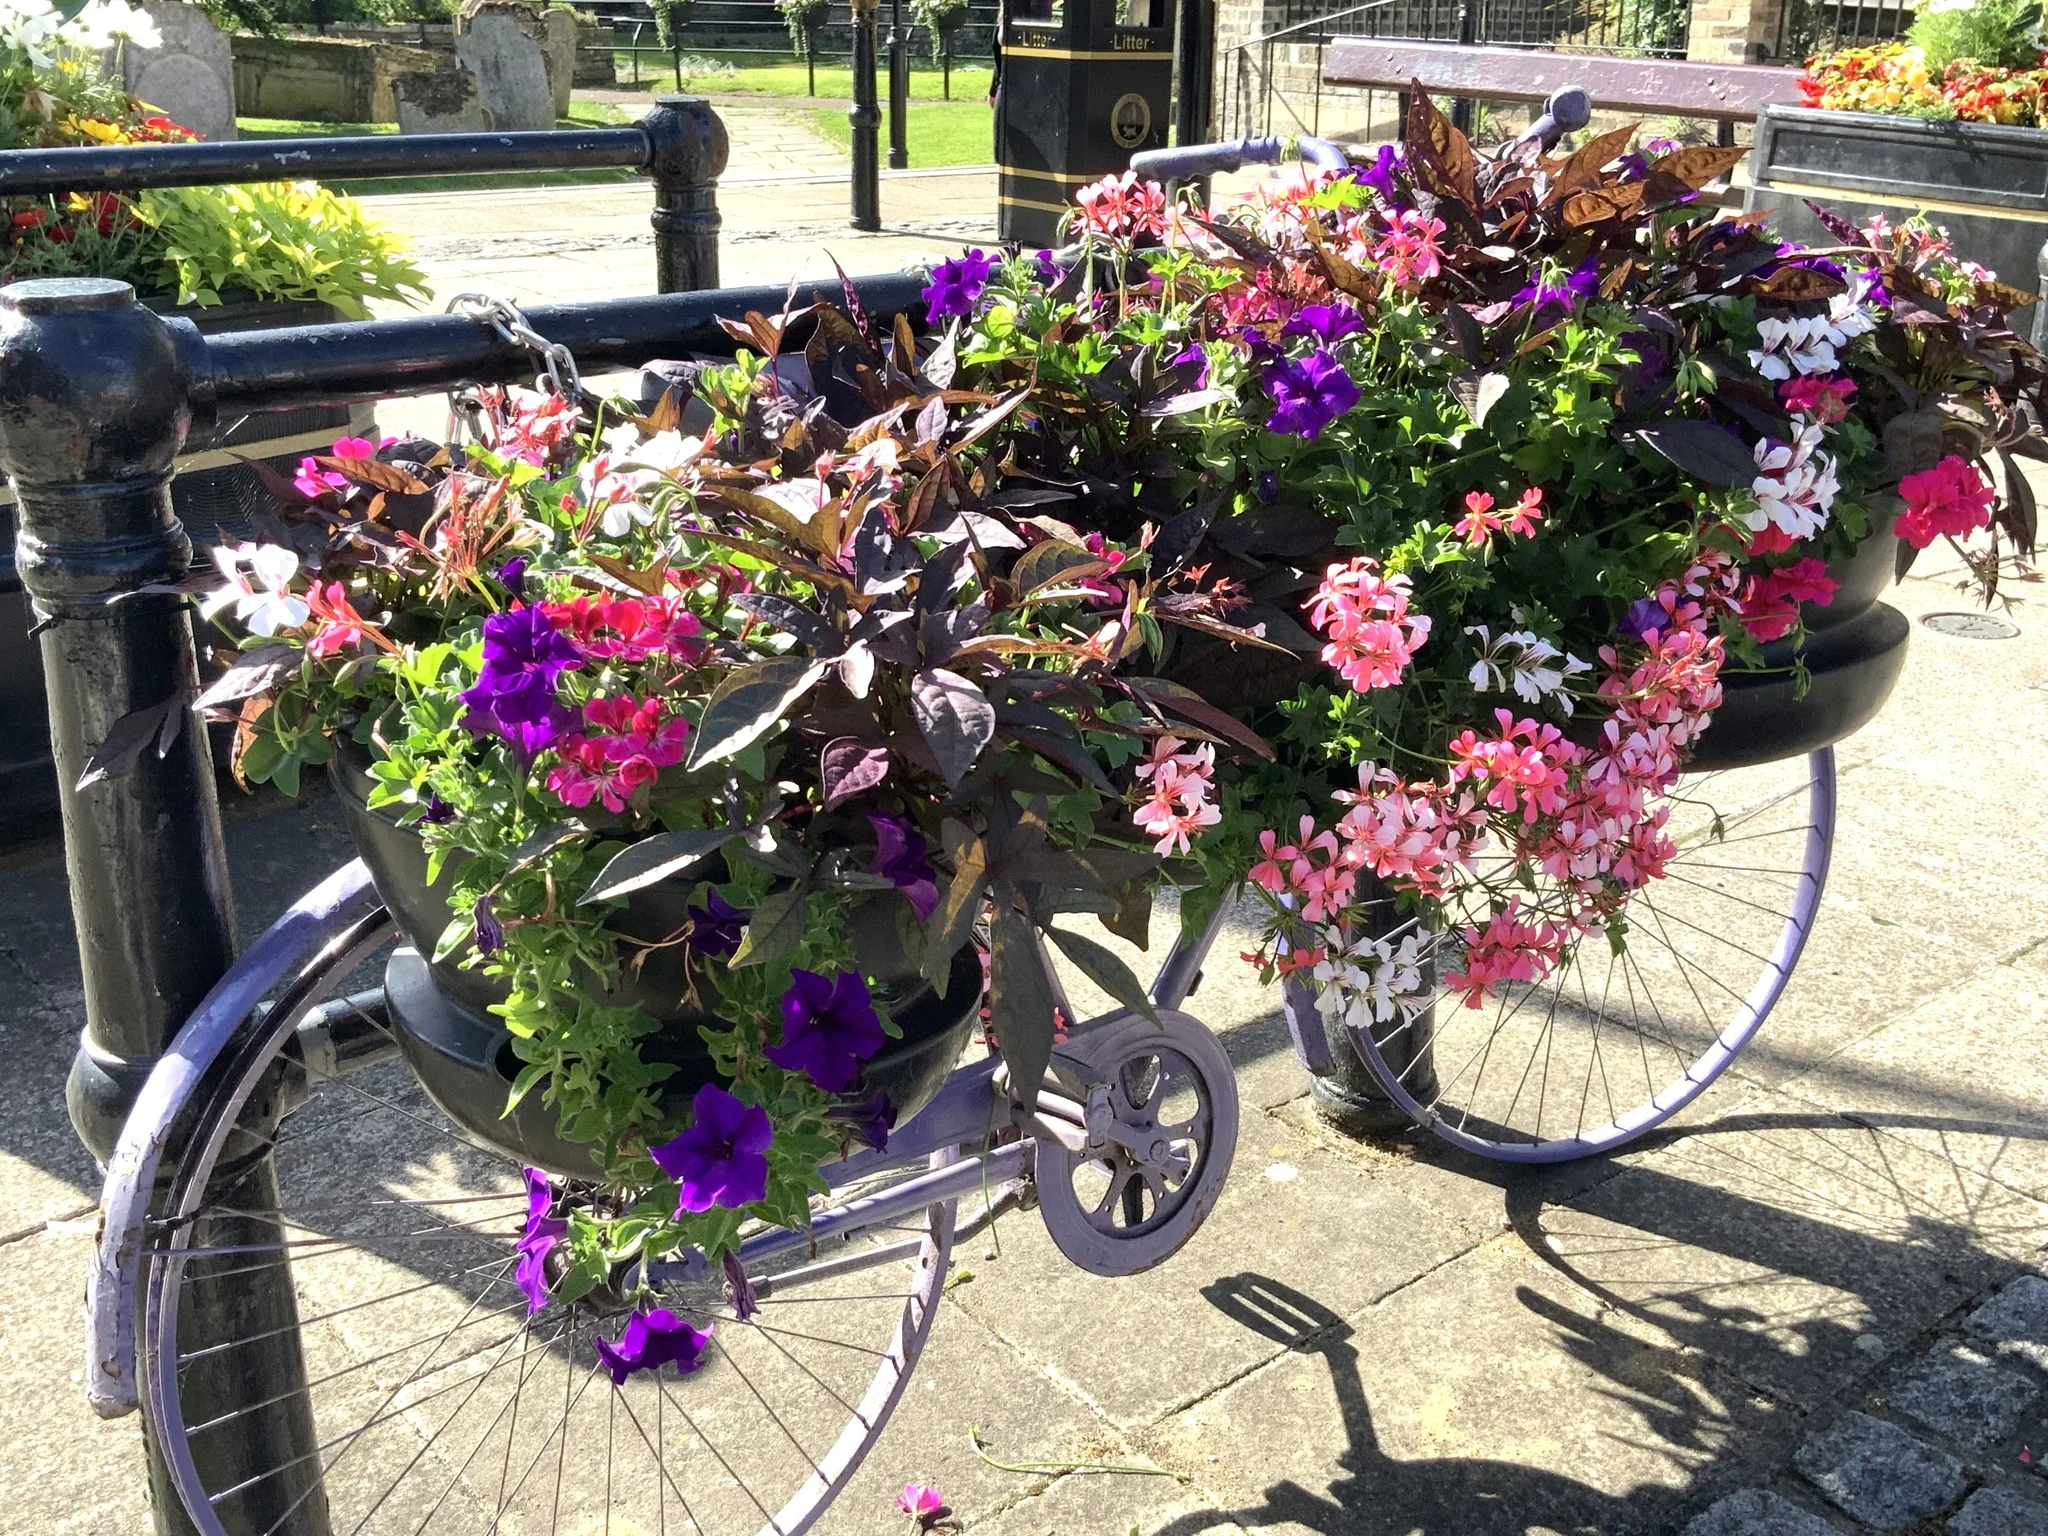 The joy of summer in Wisbech: Caught on camera this week by Wisbech Tweet and showing the array of colourful displays that can be viewed and enjoyed.